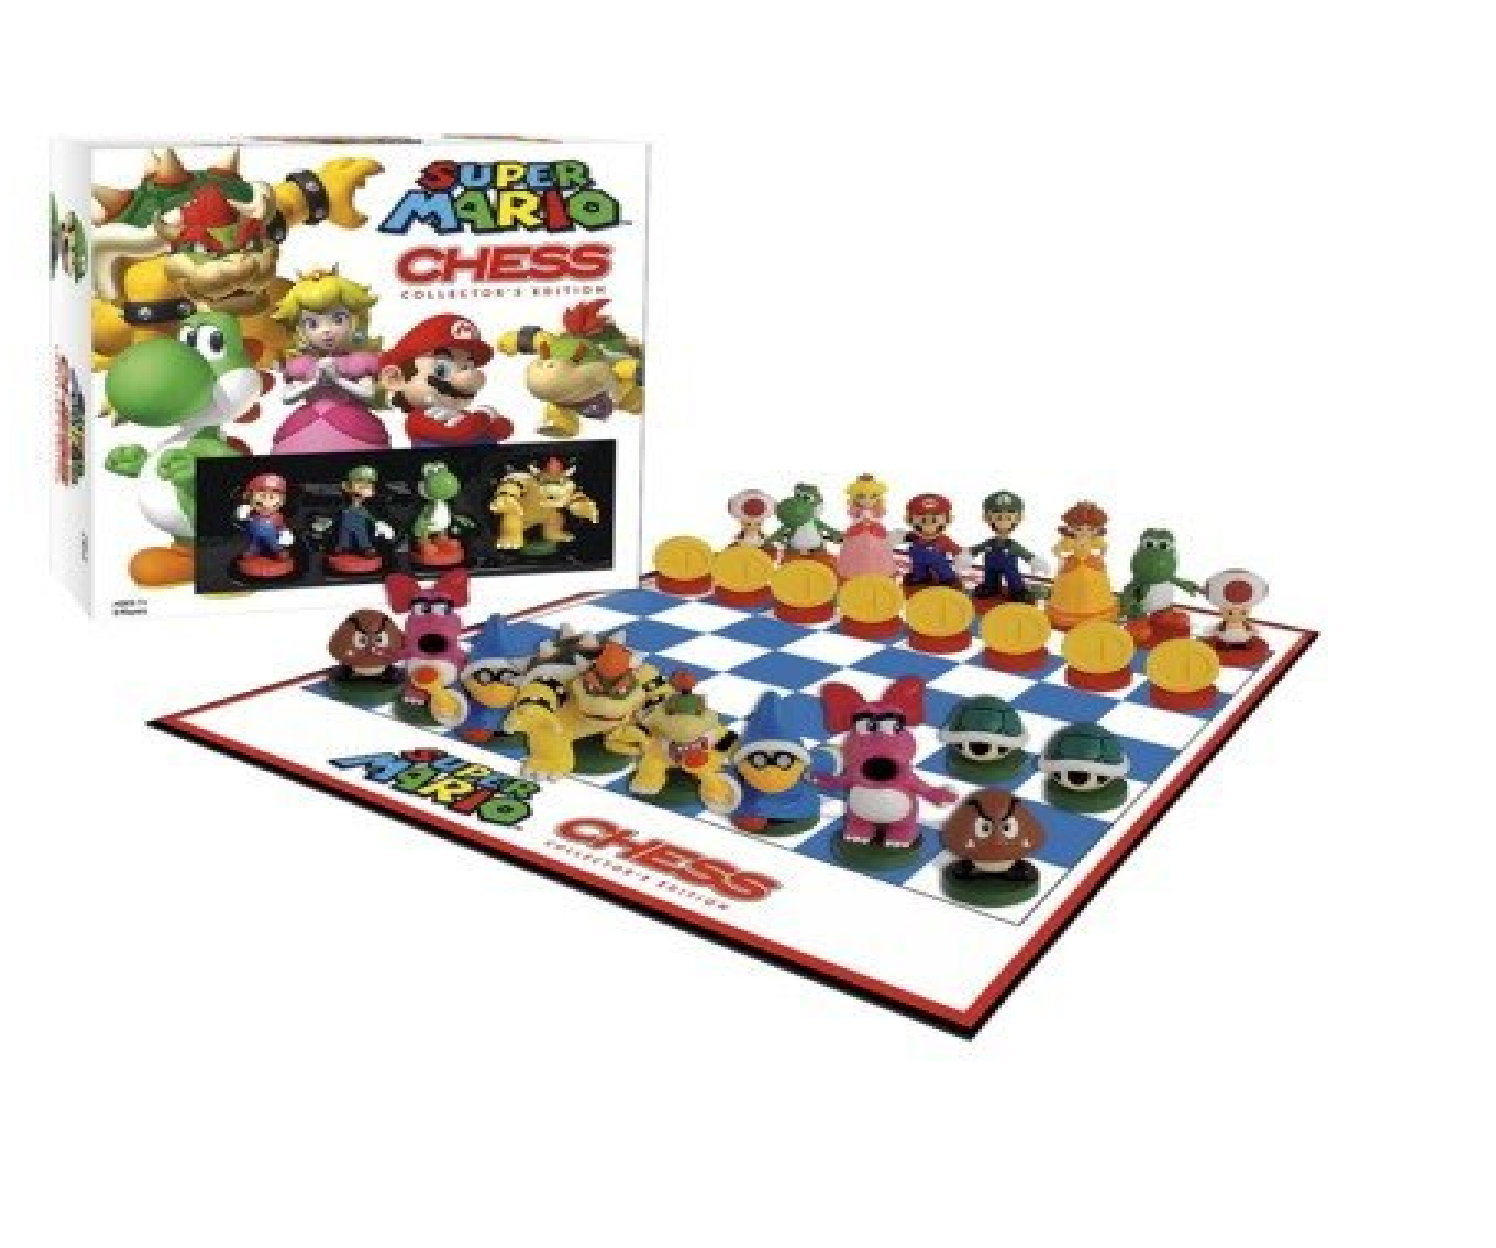 USAopoly Super Mario Chess Game - image 5 of 5